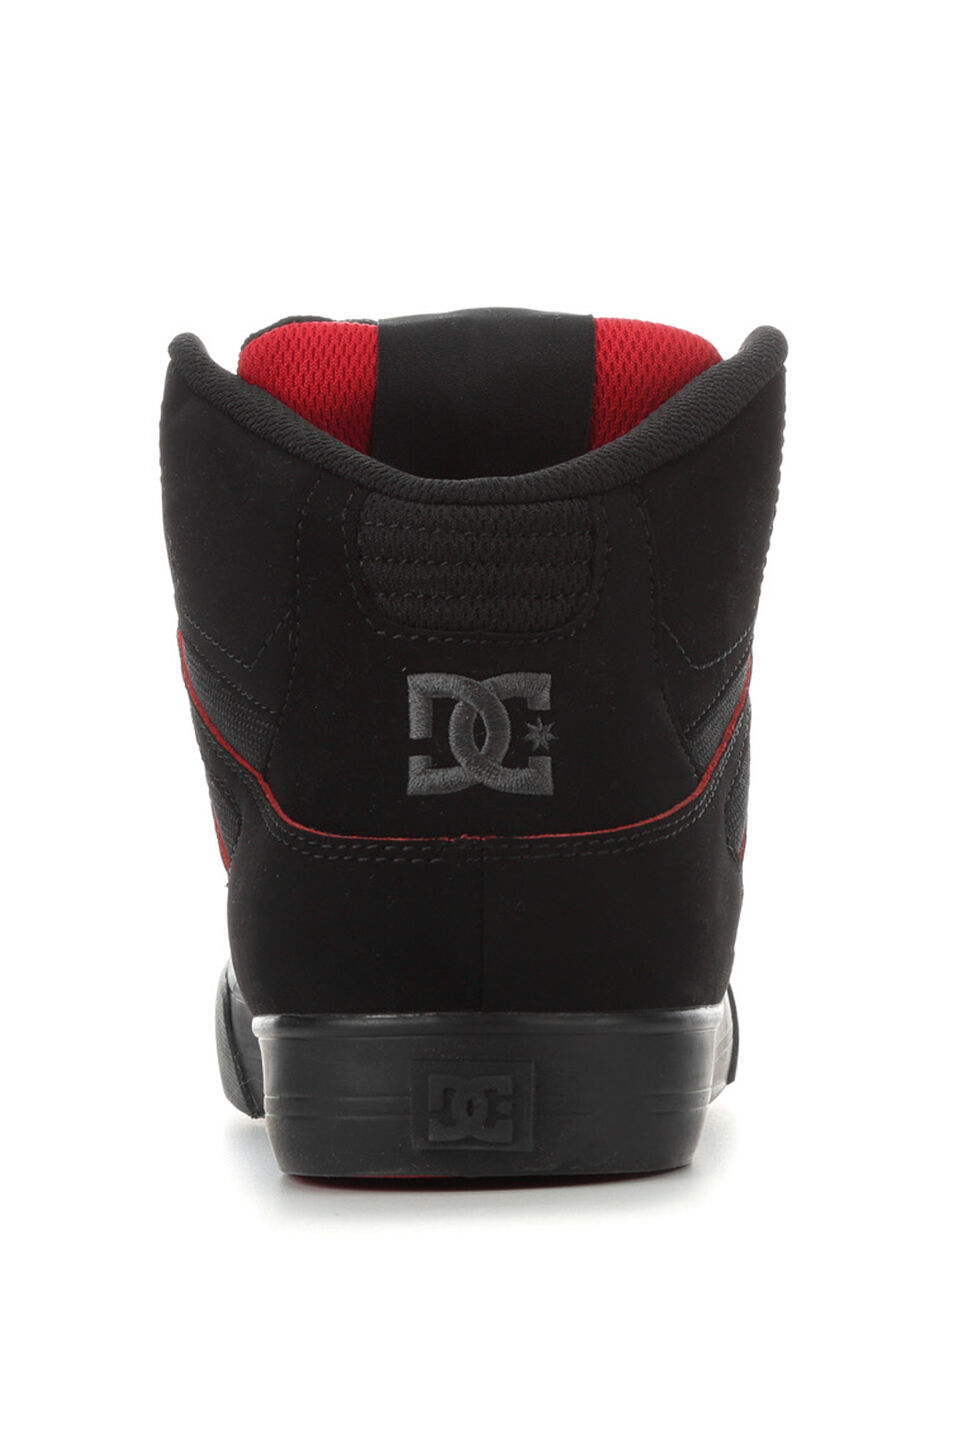 DC Shoes Pure High - Top WC